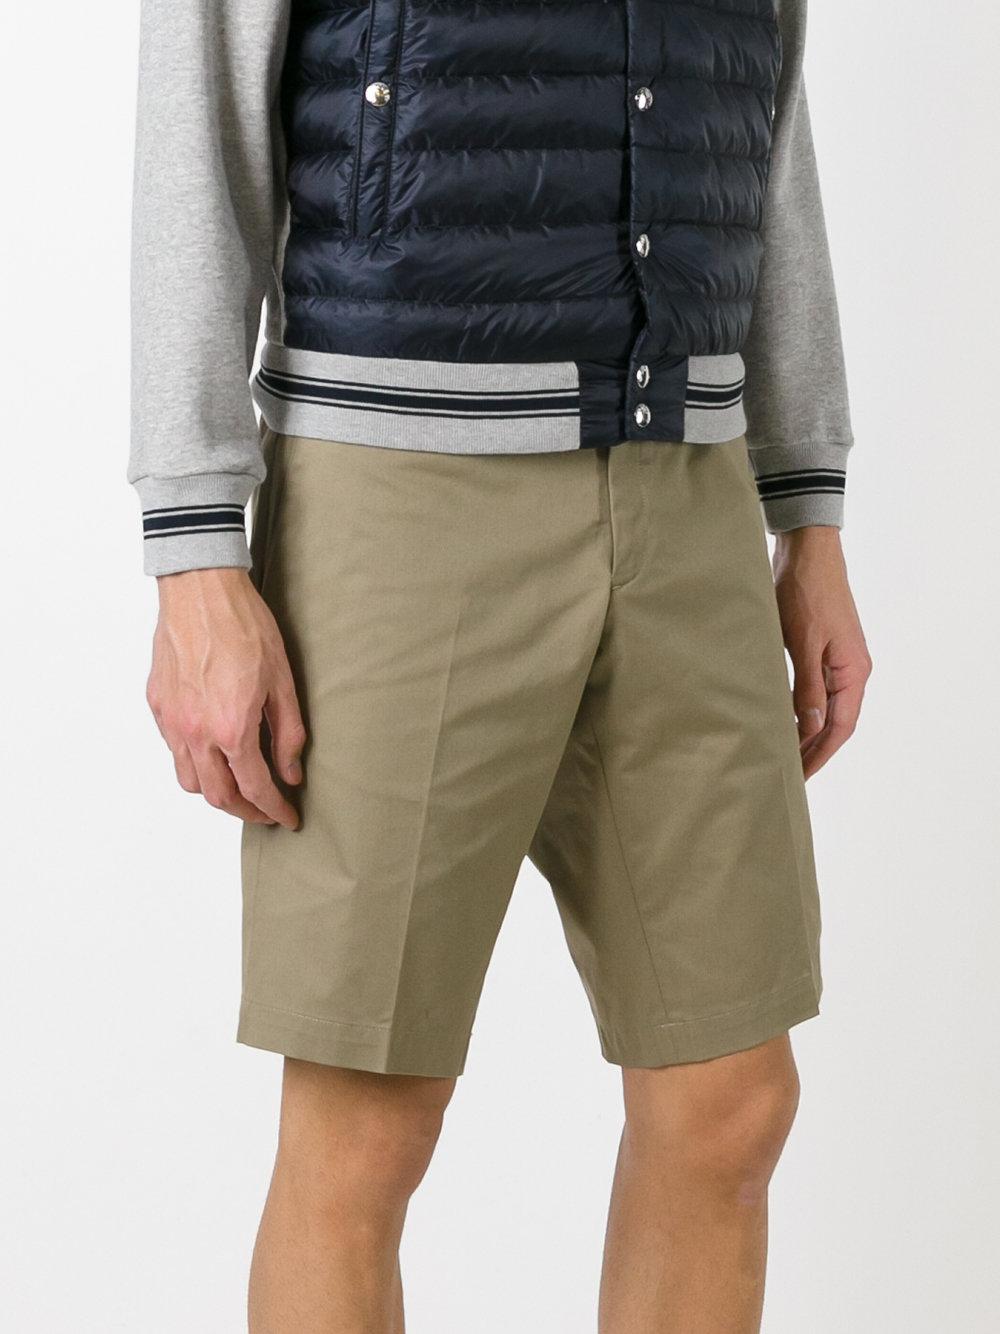 Moncler Cotton Tailored Bermuda Shorts in Natural for Men - Lyst